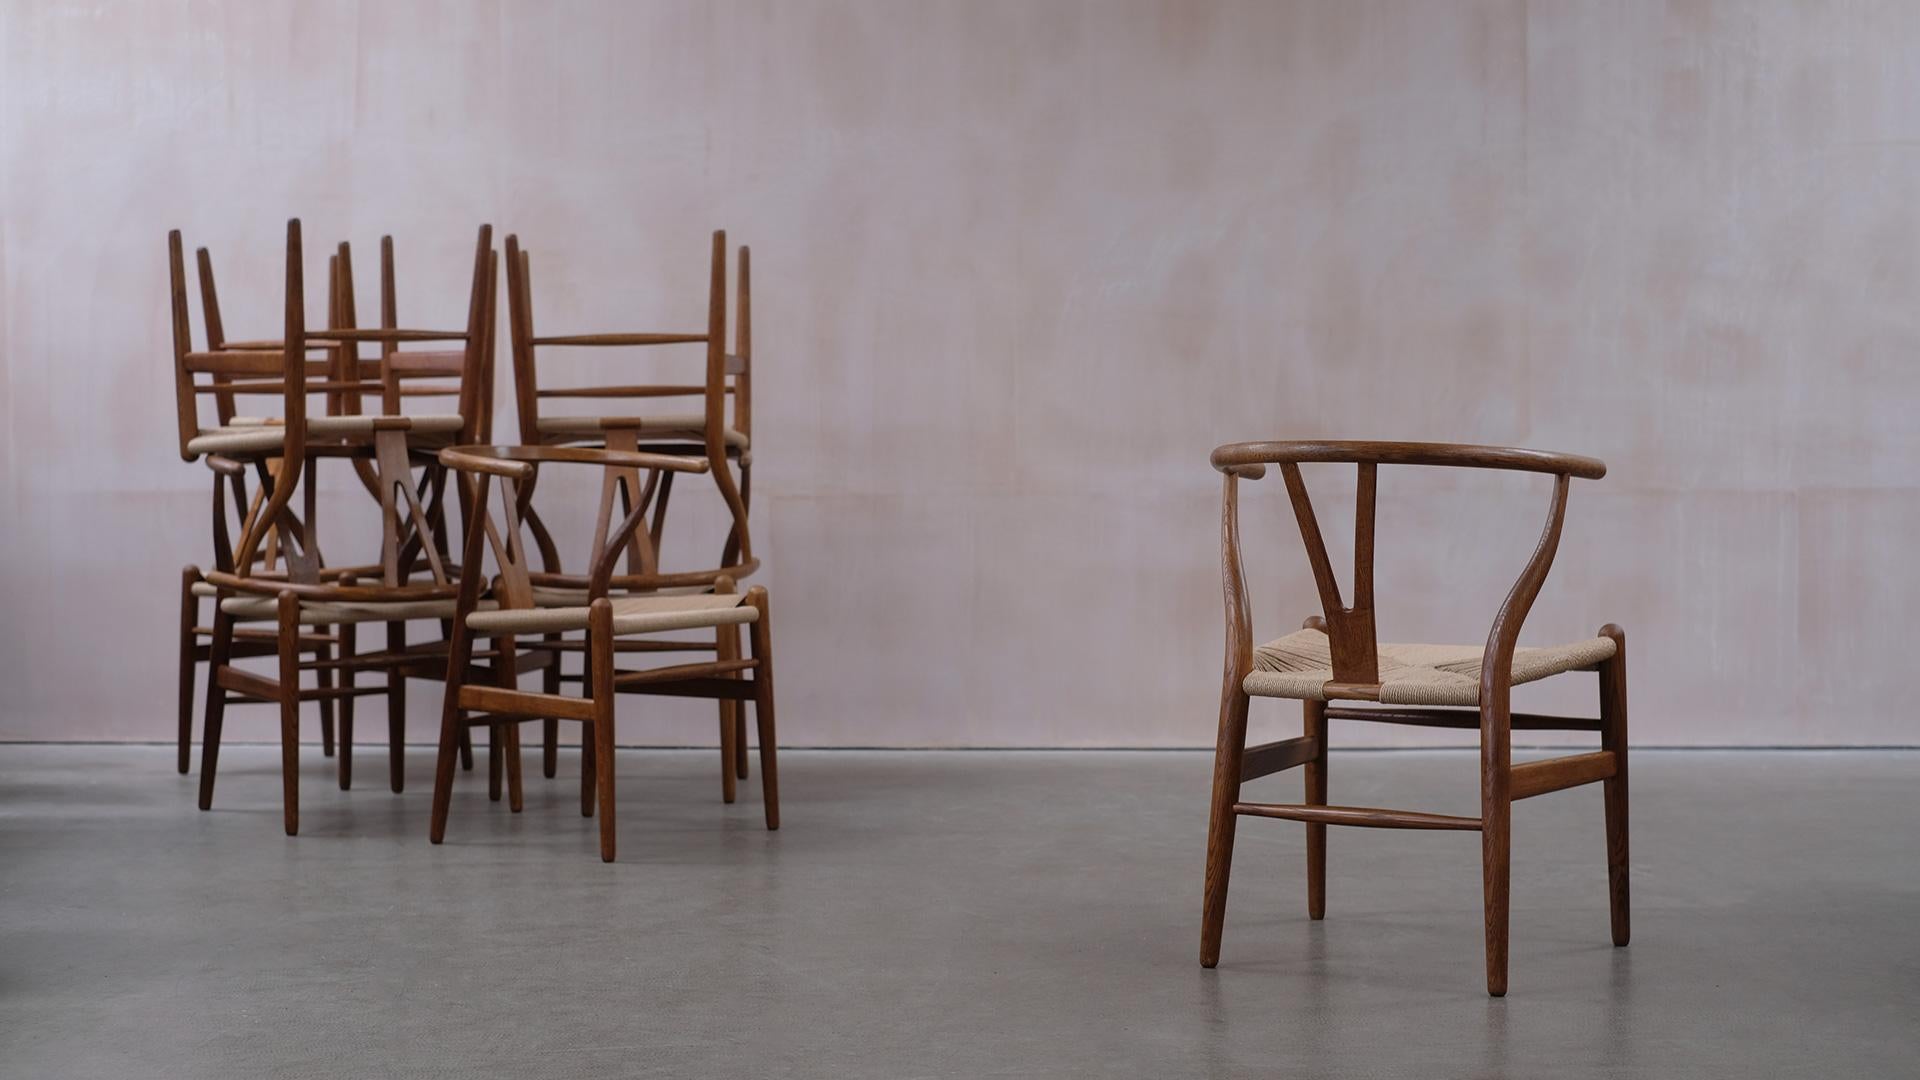 8 Hans Wegner Wishbone Chairs In Good Condition In Epperstone, Nottinghamshire